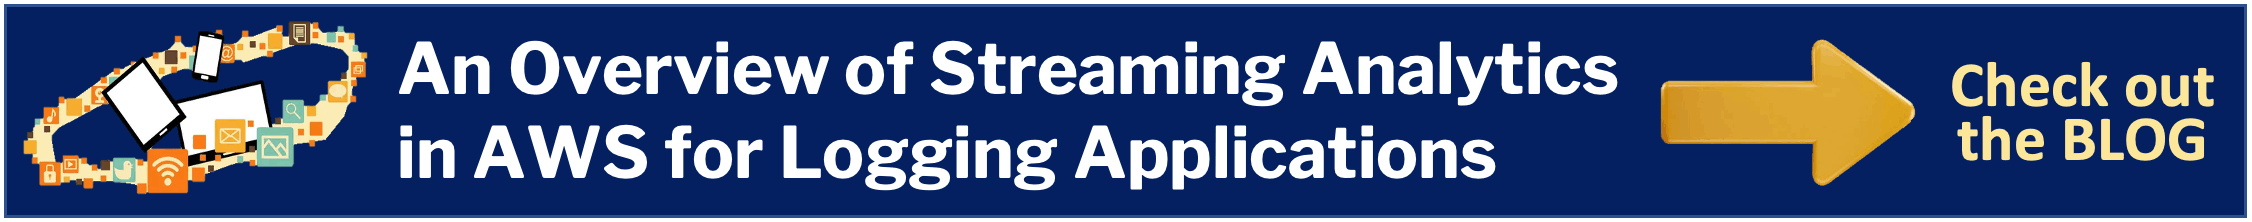 An Overview of Streaming Analytics in AWS for Logging Applications. Check out the blog!